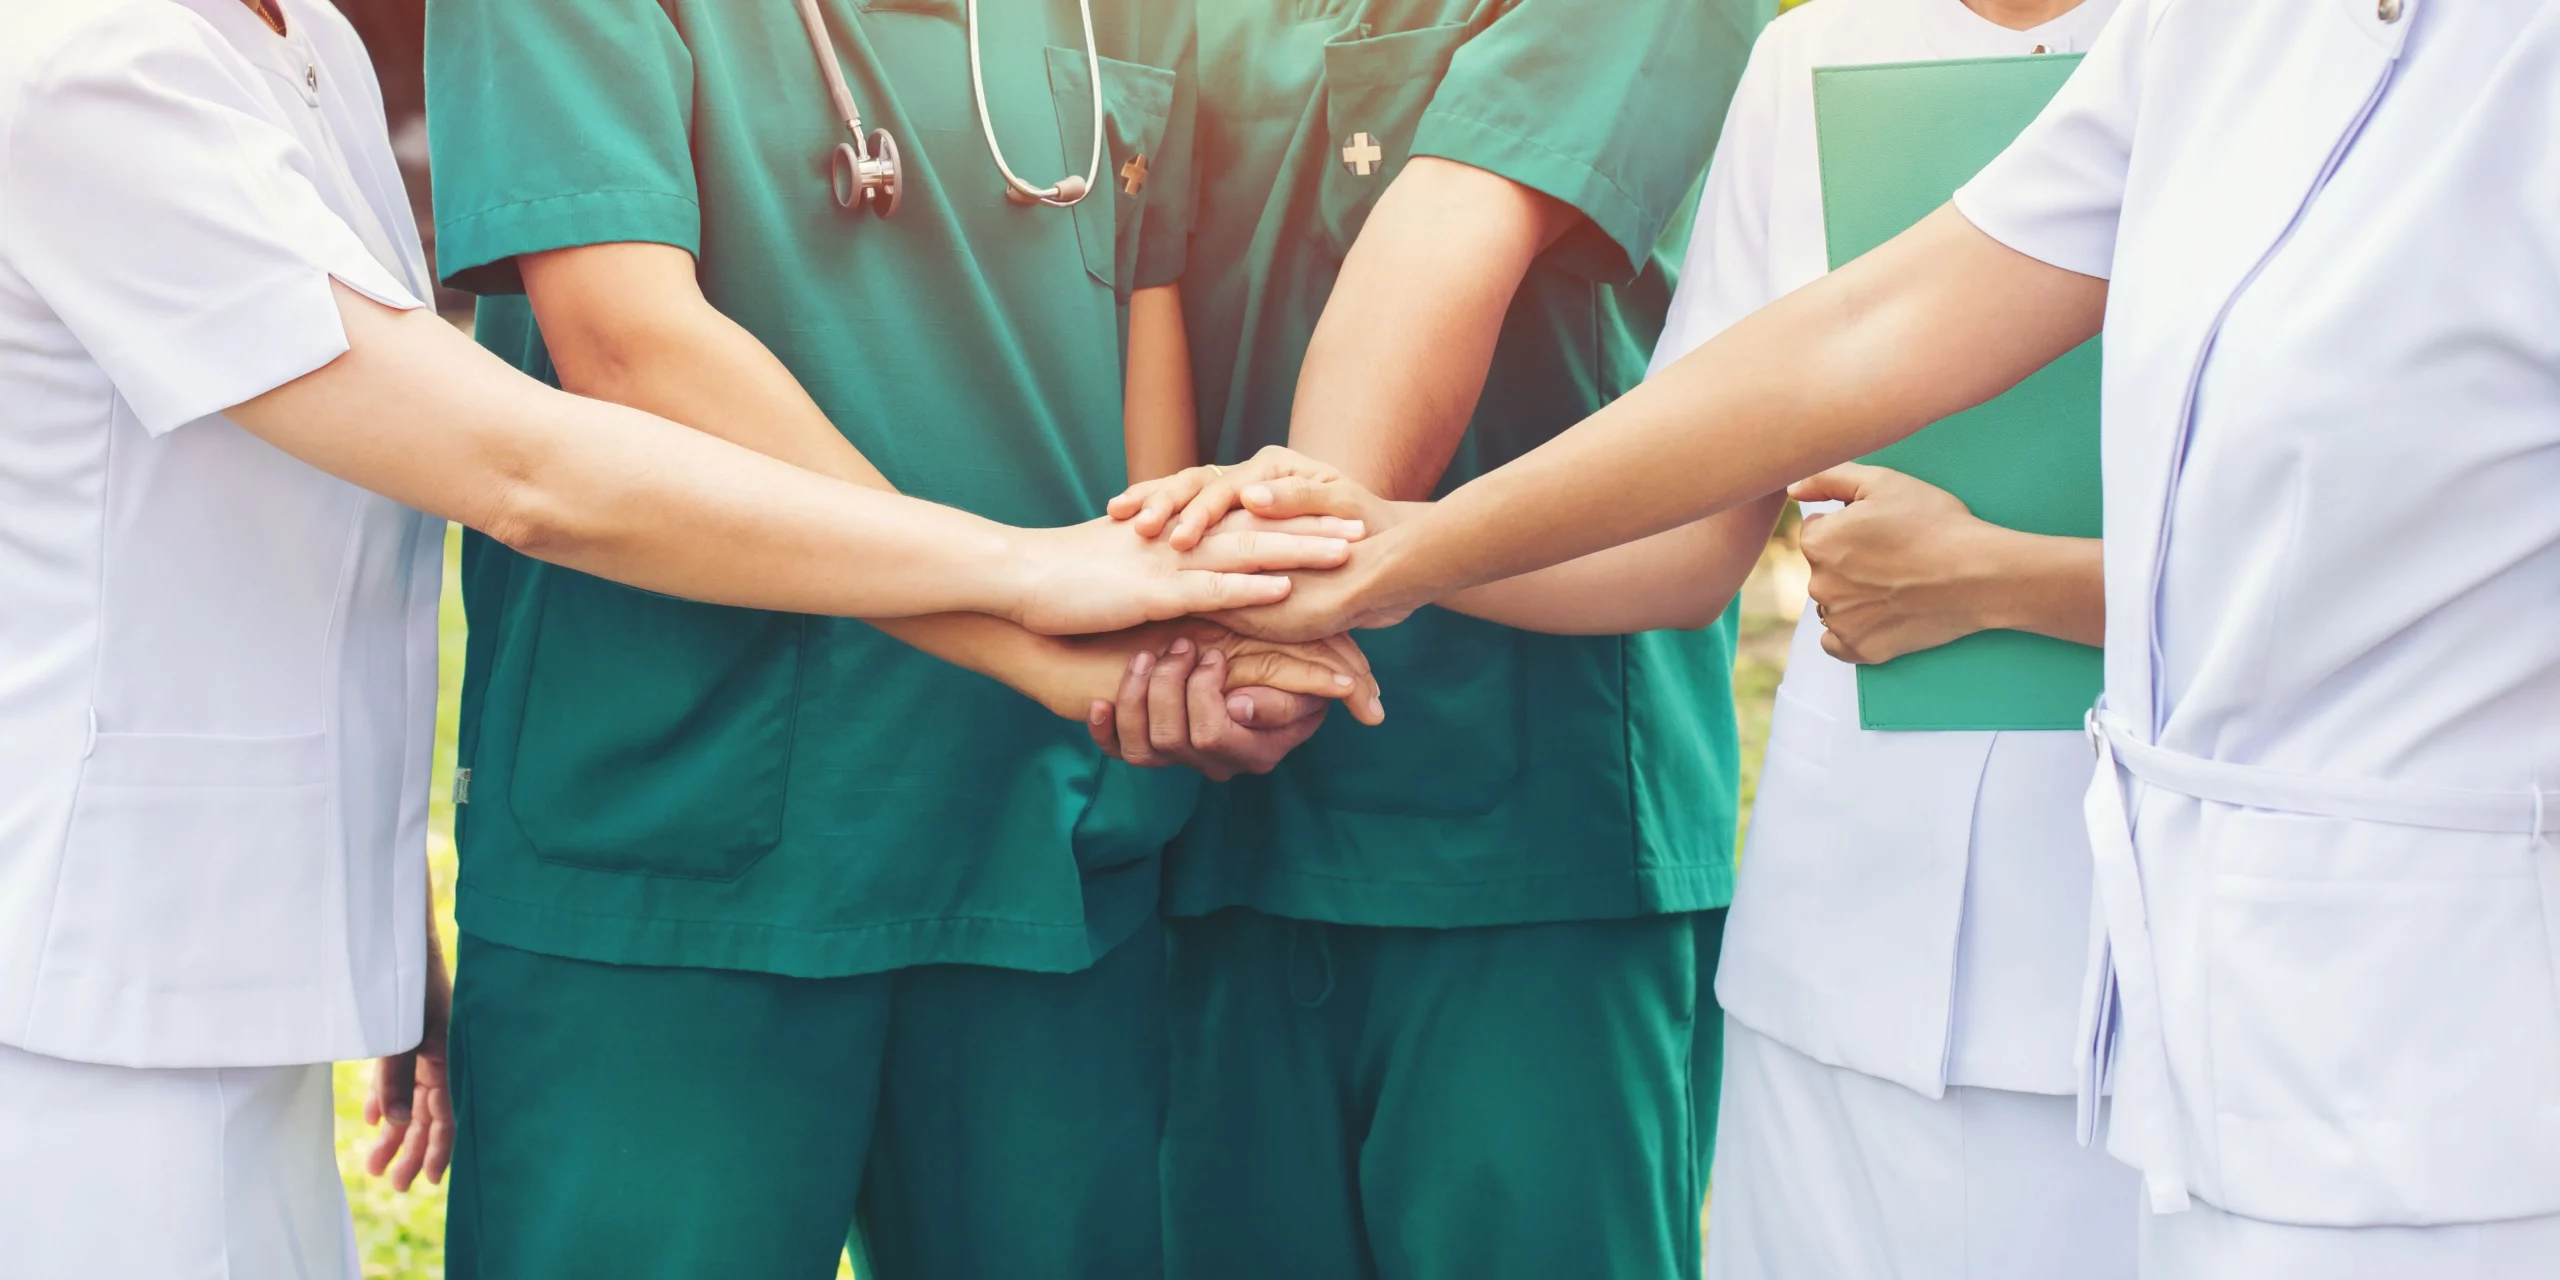 Nurses holding hands as a mark for co-operation